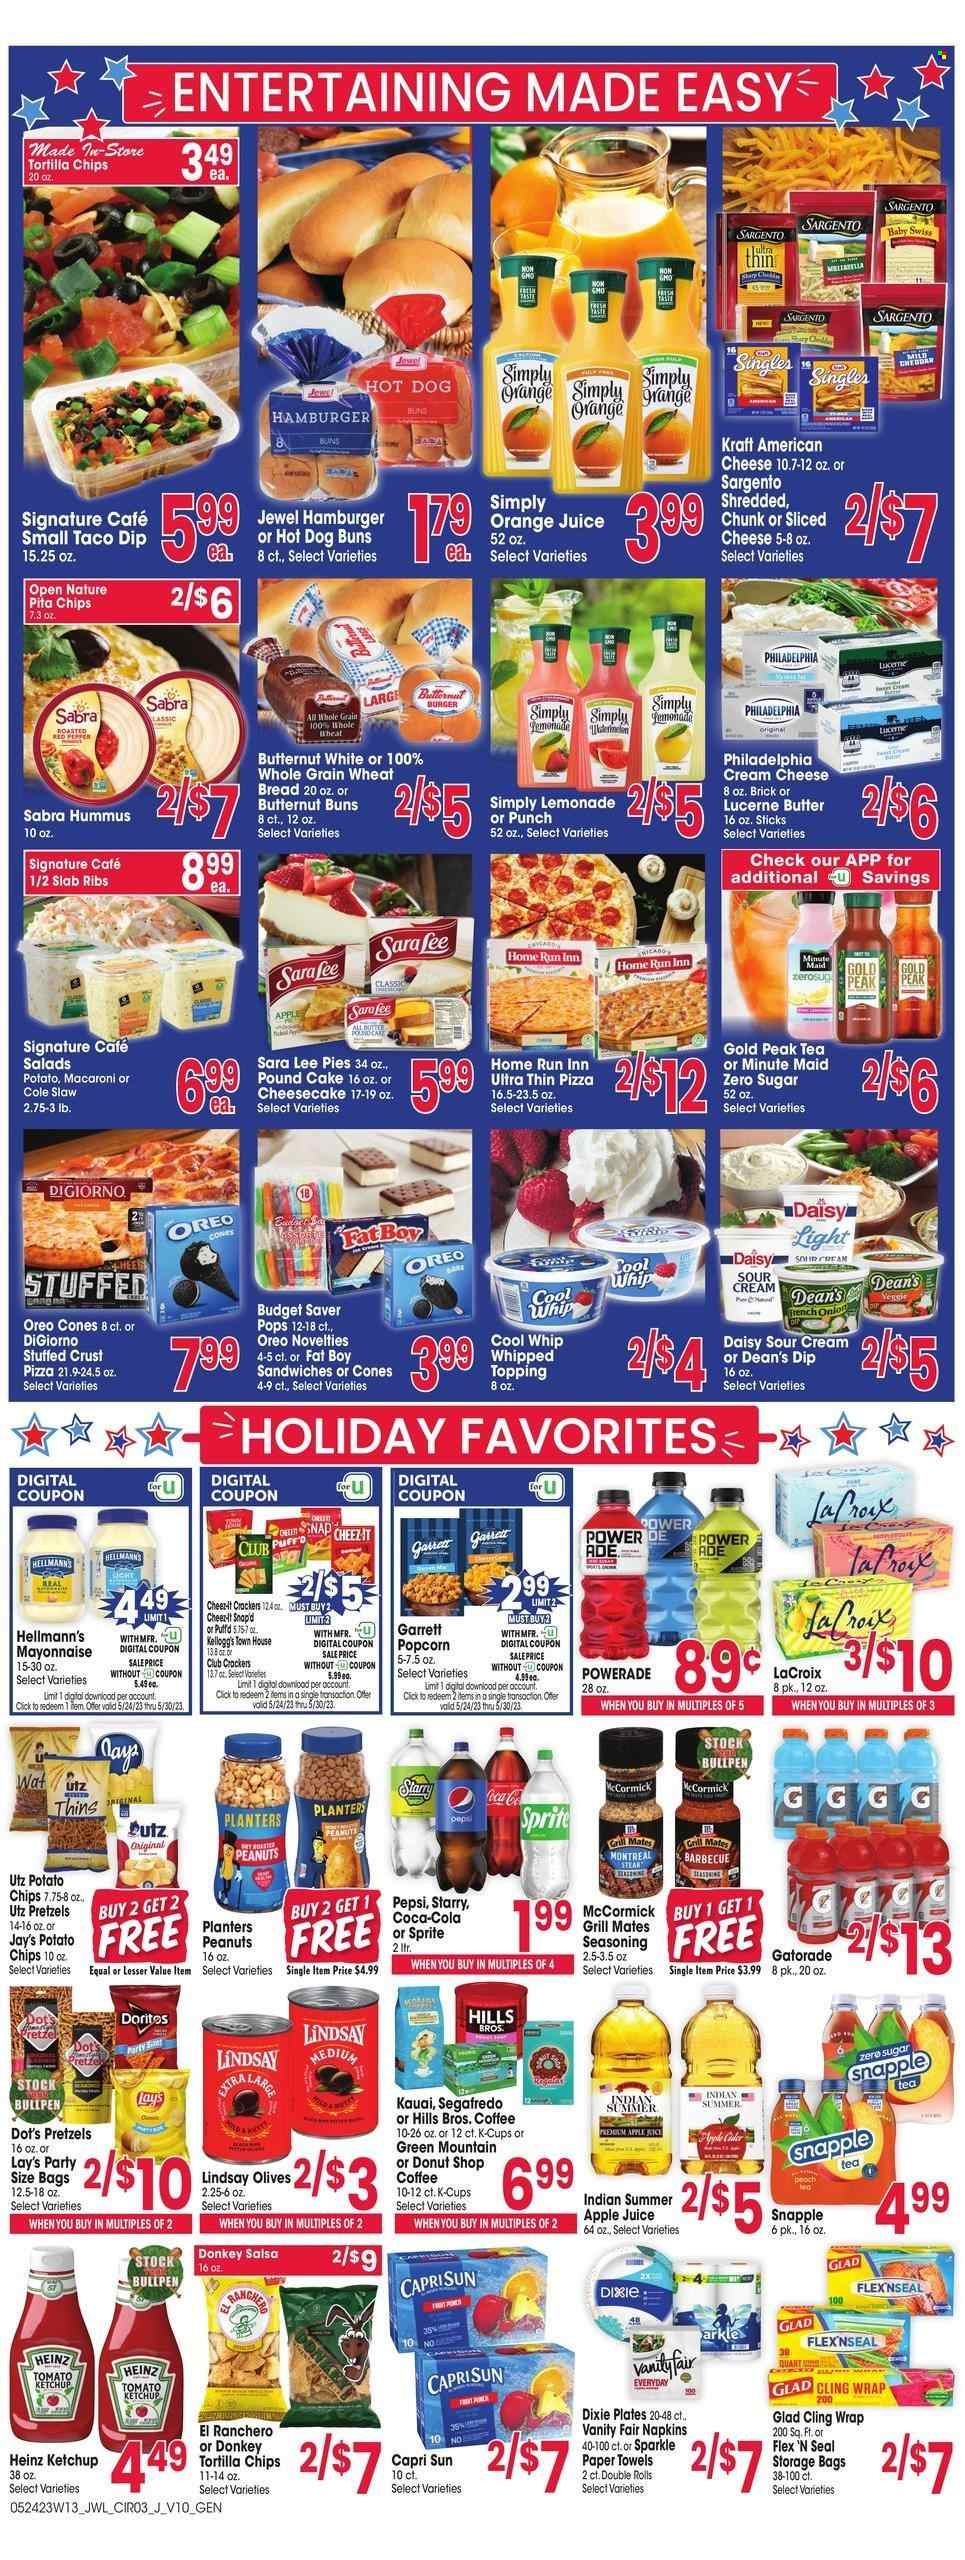 thumbnail - Jewel Osco Flyer - 05/24/2023 - 05/30/2023 - Sales products - wheat bread, pretzels, cake, pie, buns, Sara Lee, cheesecake, pound cake, butternut squash, onion, pizza, macaroni, Kraft®, hummus, american cheese, sliced cheese, Philadelphia, cheese, Sargento, Oreo, Cool Whip, sour cream, mayonnaise, dip, Hellmann’s, crackers, Kellogg's, Doritos, tortilla chips, potato chips, chips, Lay’s, Thins, popcorn, Cheez-It, pita chips, salty snack, topping, Heinz, olives, spice, ketchup, salsa, peanuts, Planters, apple juice, Capri Sun, Coca-Cola, lemonade, Sprite, Powerade, Pepsi, orange juice, juice, energy drink, ice tea, soft drink, Snapple, Gold Peak Tea, Gatorade, fruit punch, coffee, coffee capsules, K-Cups, Segafredo, Green Mountain, apple cider, cider, steak, ribs, napkins, kitchen towels, paper towels, storage bag, Dixie, plate, Hill's, electrolyte drink. Page 3.